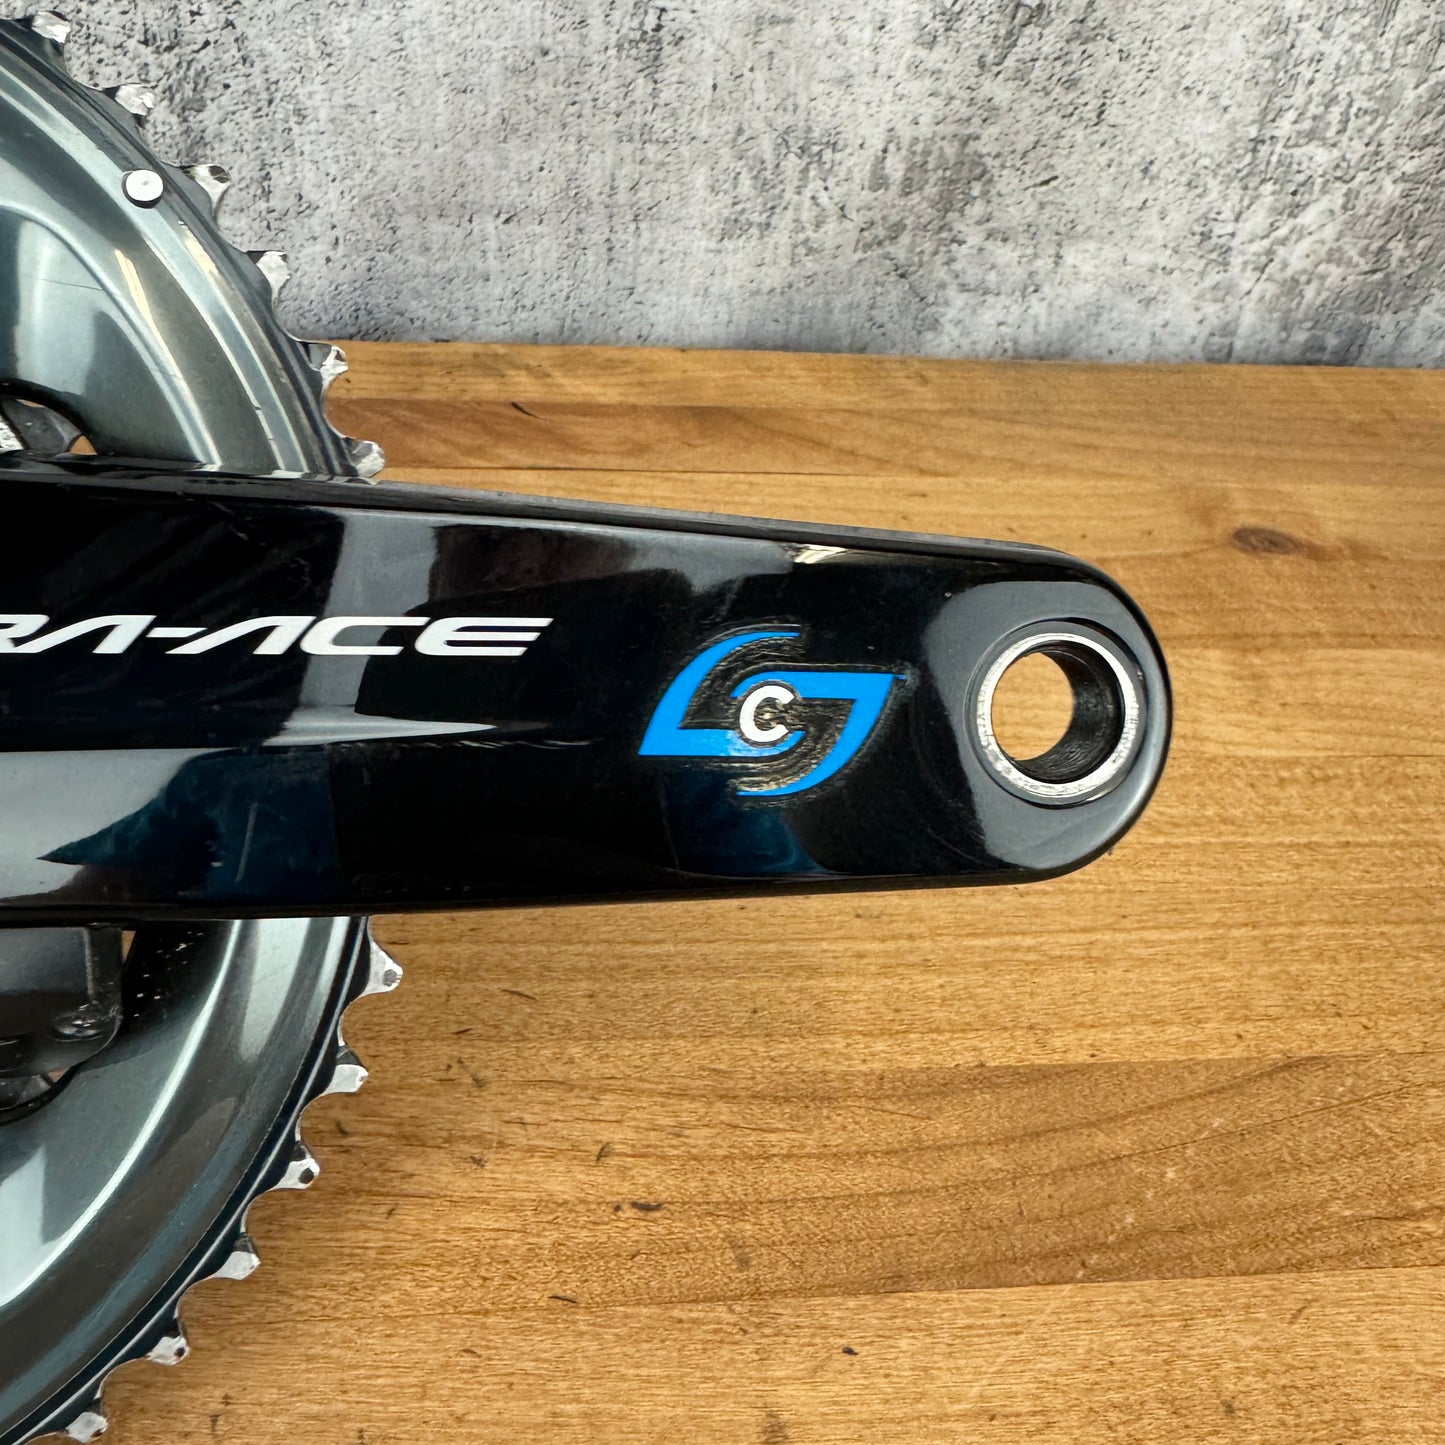 Shimano Dura-Ace FC-R9100 Stages 52/36t Power Meter 175mm Crankset Passed Recall